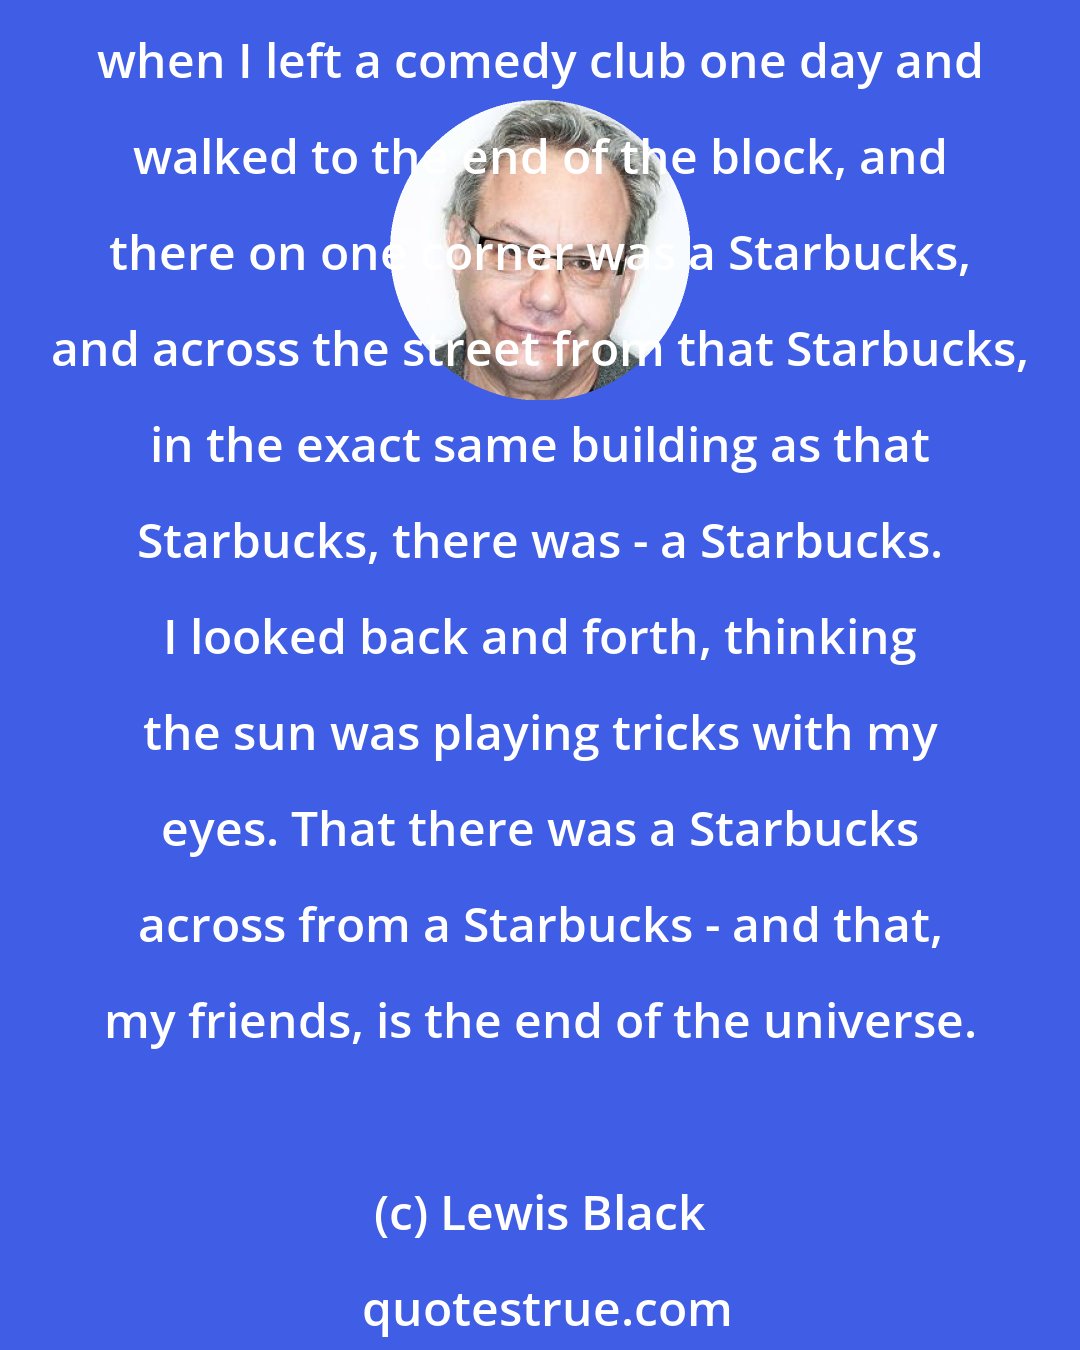 Lewis Black: I've seen the end of the universe, and it happens to be in the United States and, oddly enough, it's in Houston, Texas. I know - I was shocked, too. Imagine my surprise when I left a comedy club one day and walked to the end of the block, and there on one corner was a Starbucks, and across the street from that Starbucks, in the exact same building as that Starbucks, there was - a Starbucks. I looked back and forth, thinking the sun was playing tricks with my eyes. That there was a Starbucks across from a Starbucks - and that, my friends, is the end of the universe.